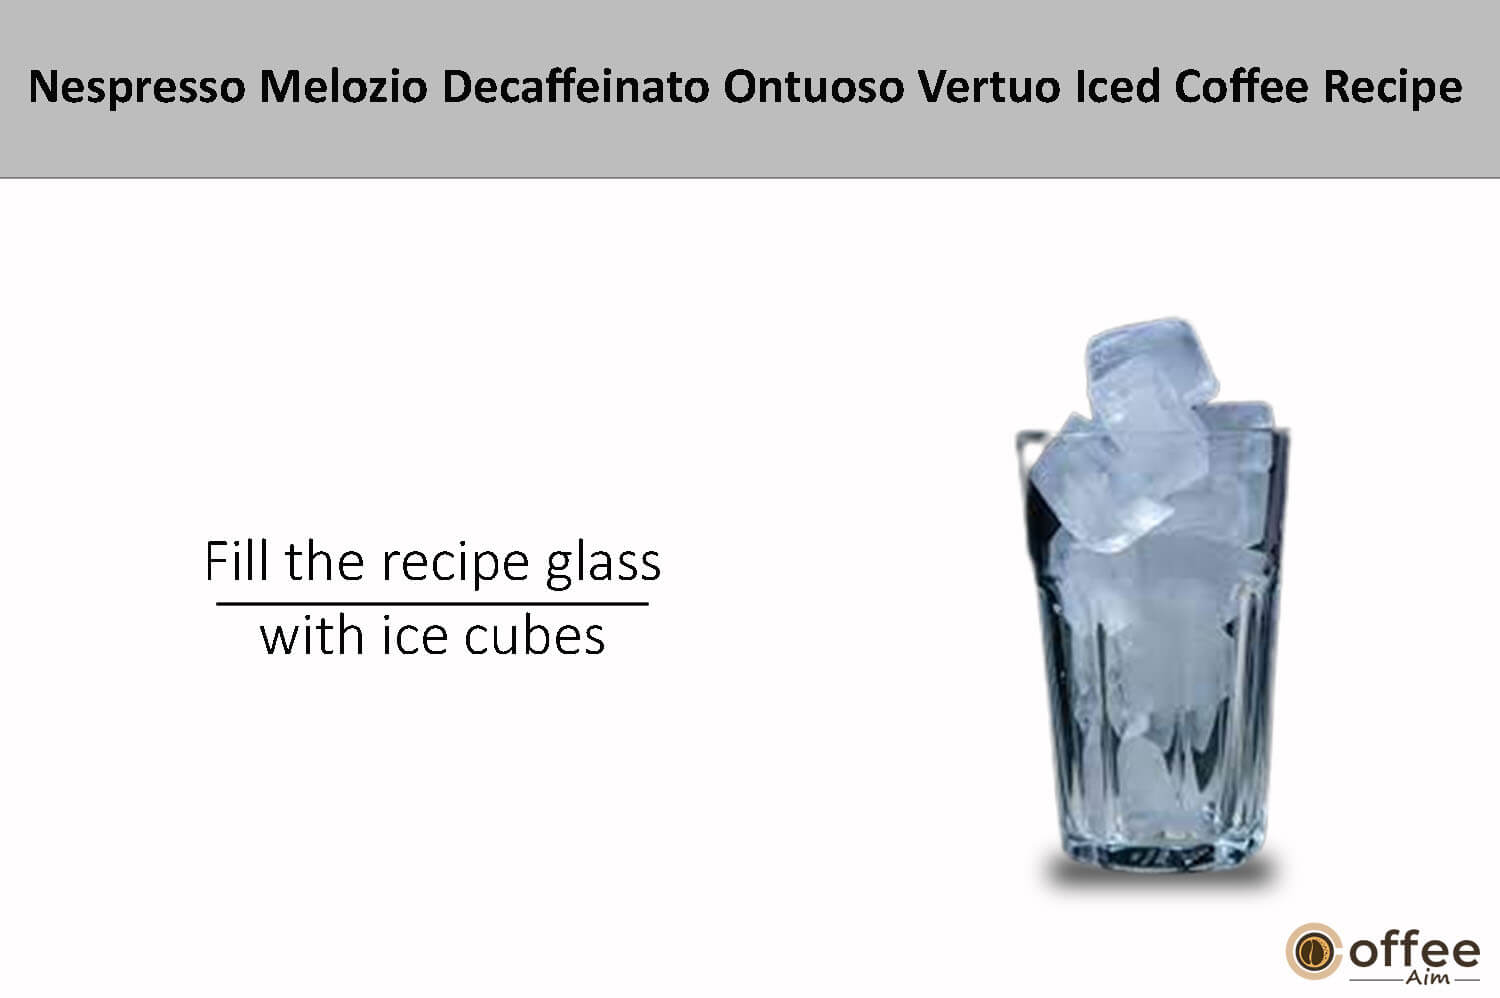 In this image i explain that fill the recipe glass with ice cubes.